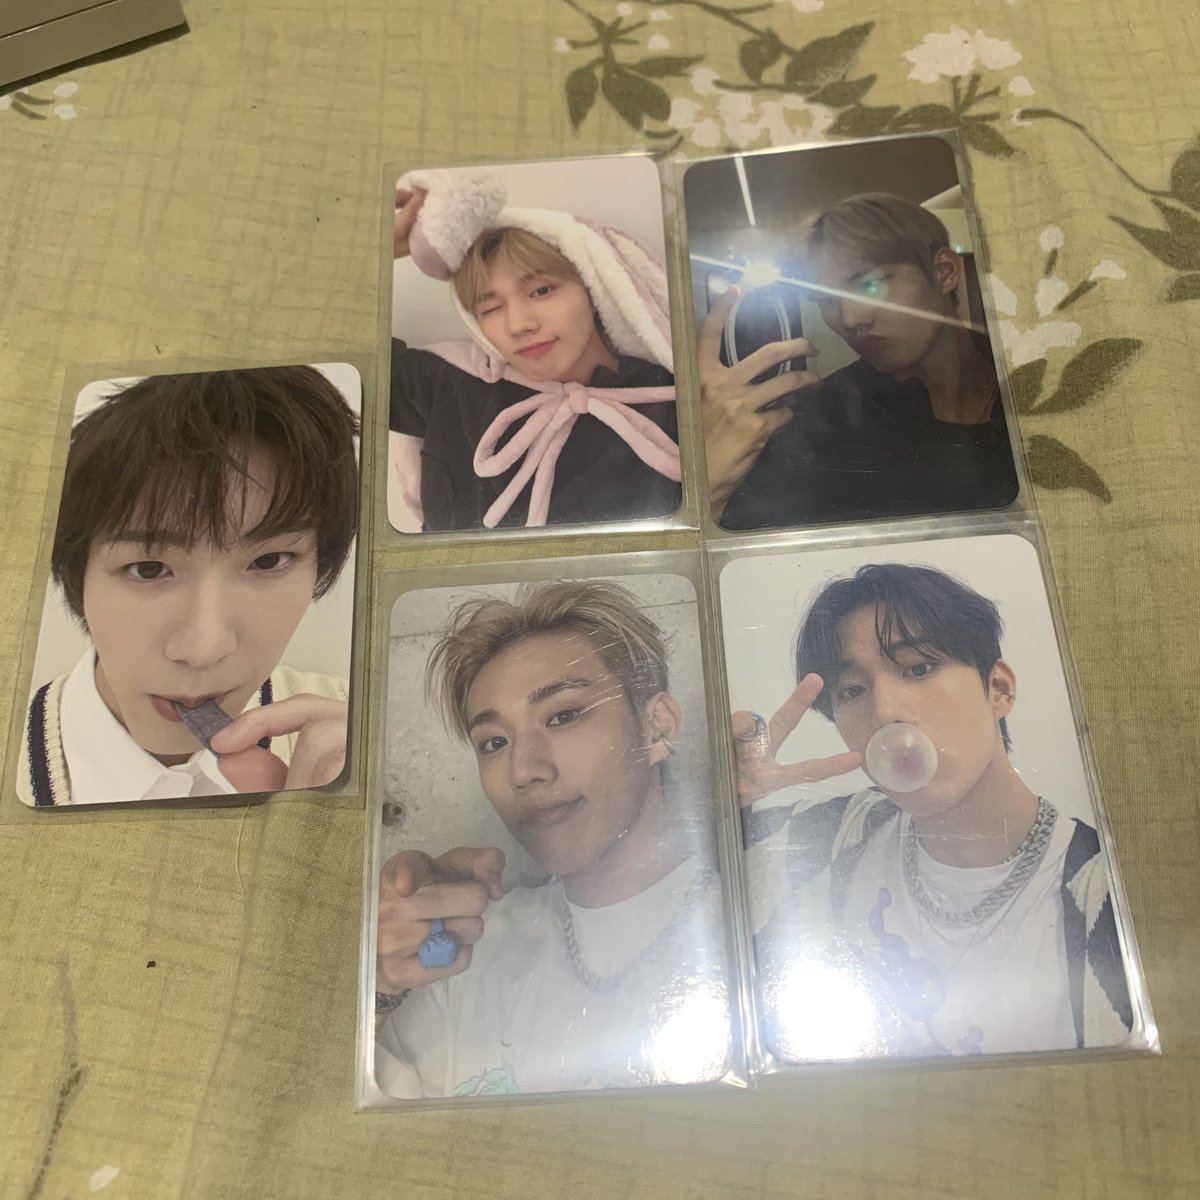 wts lfb ph p1harmony intak pobs & pcs — ☻ all mint condition & onhand — ☻ ₱2,500 for set + pf & lsf — ☻ free soul bbg pc for set taker dop: payo only can host hatian, can ship to diff addys :) help rt, super need the fund lang!